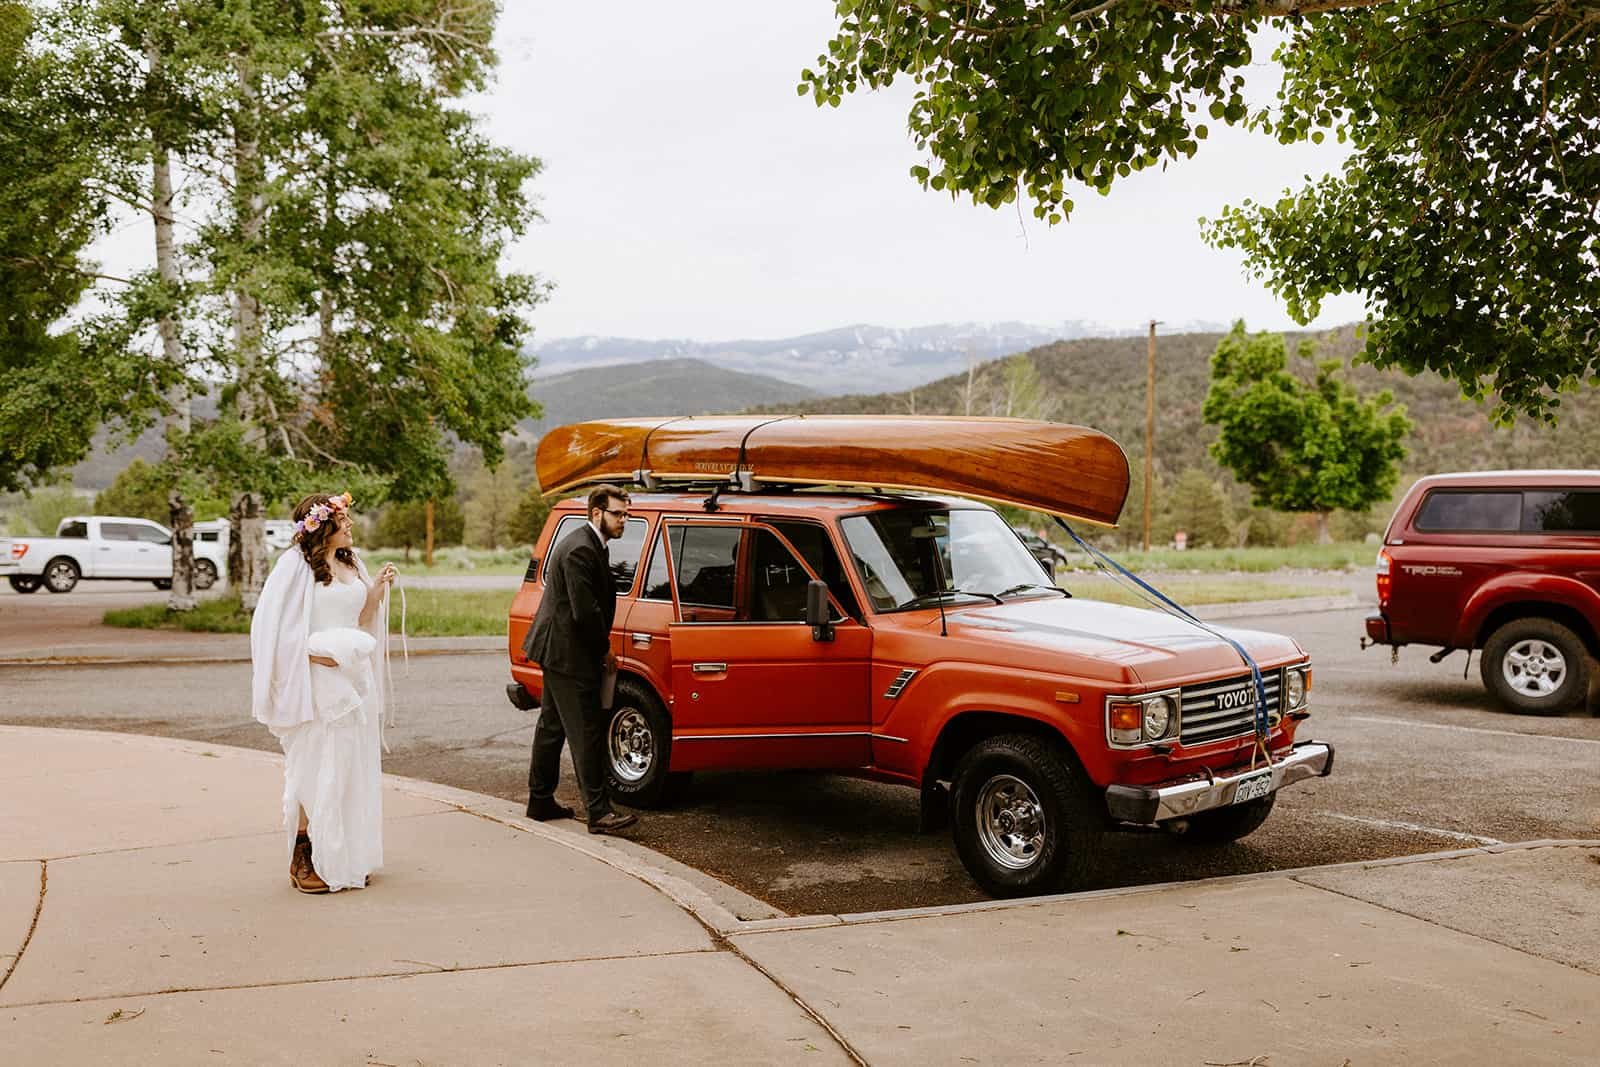 A man and woman in their wedding clothes get out of a red Toyota Land Cruiser 